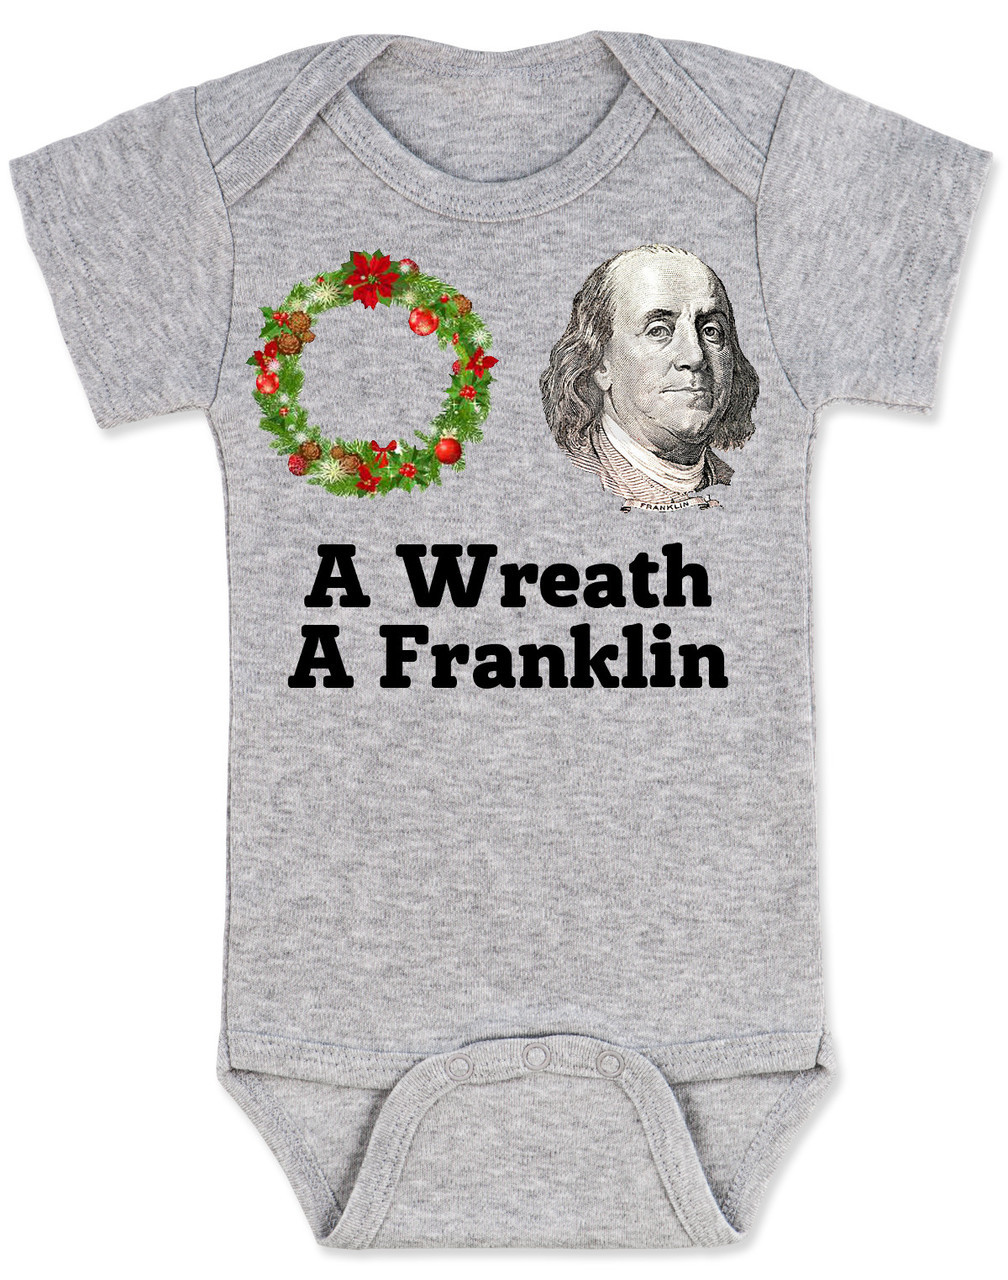 A Wreath A Franklin - Baby Onesie and Toddler Shirt